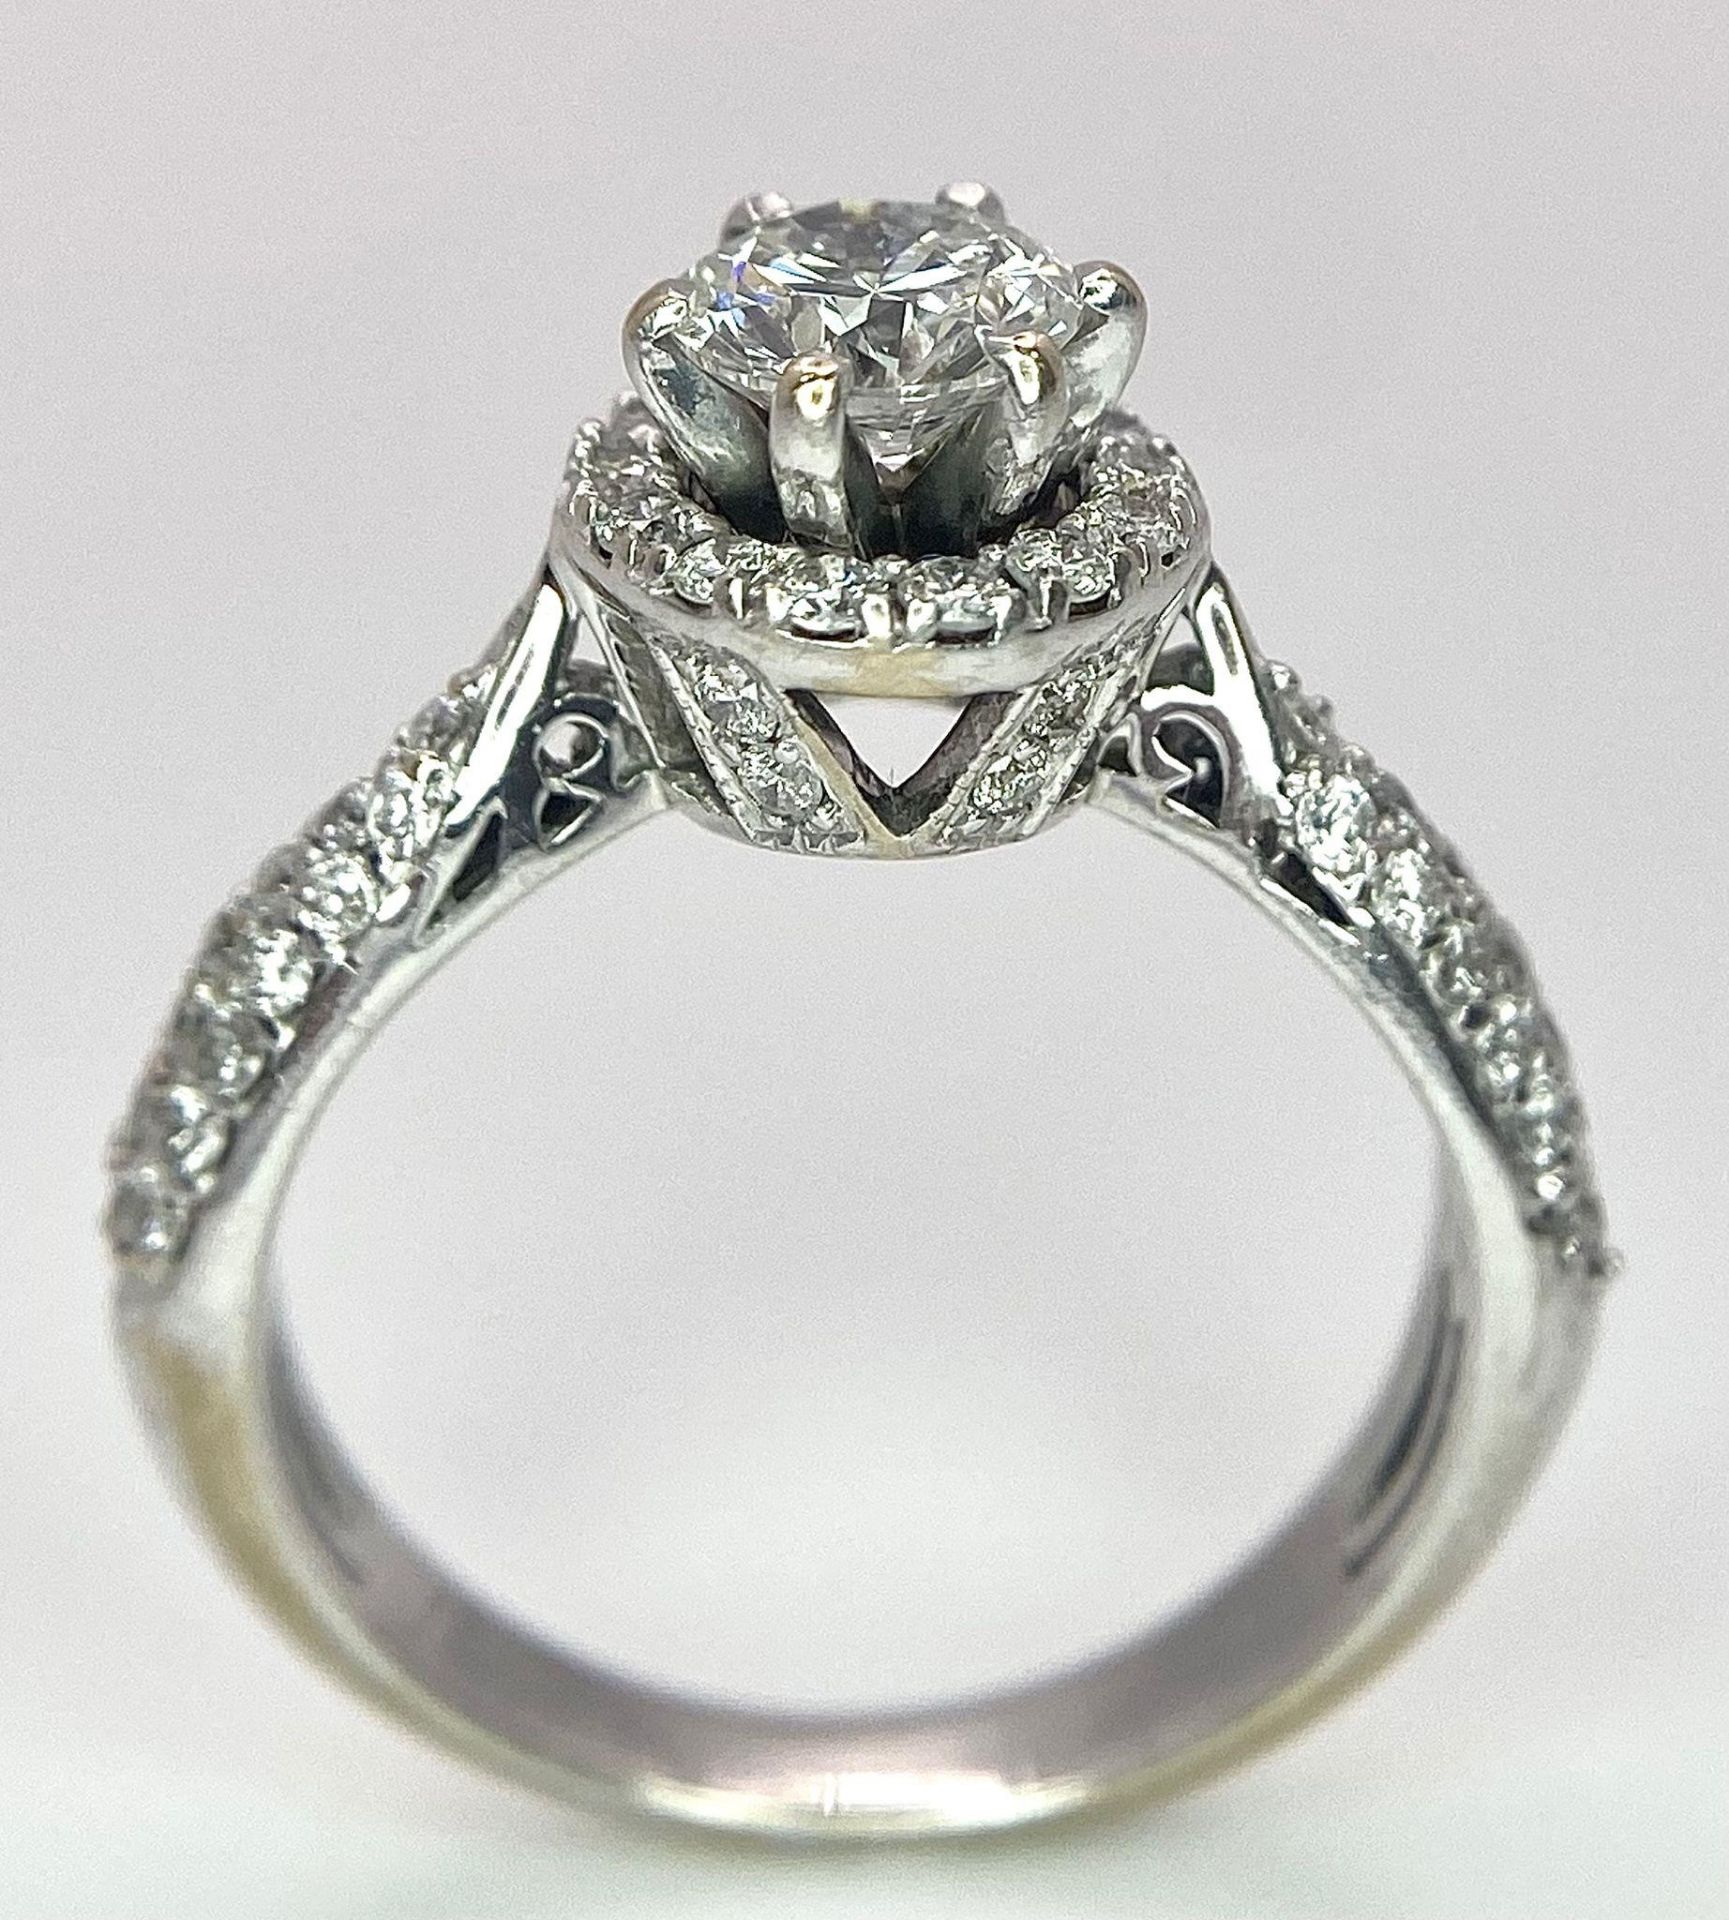 An 18K White Gold Diamond Ring. Central 0.75ct brilliant round cut diamond with a diamond halo and - Image 5 of 10